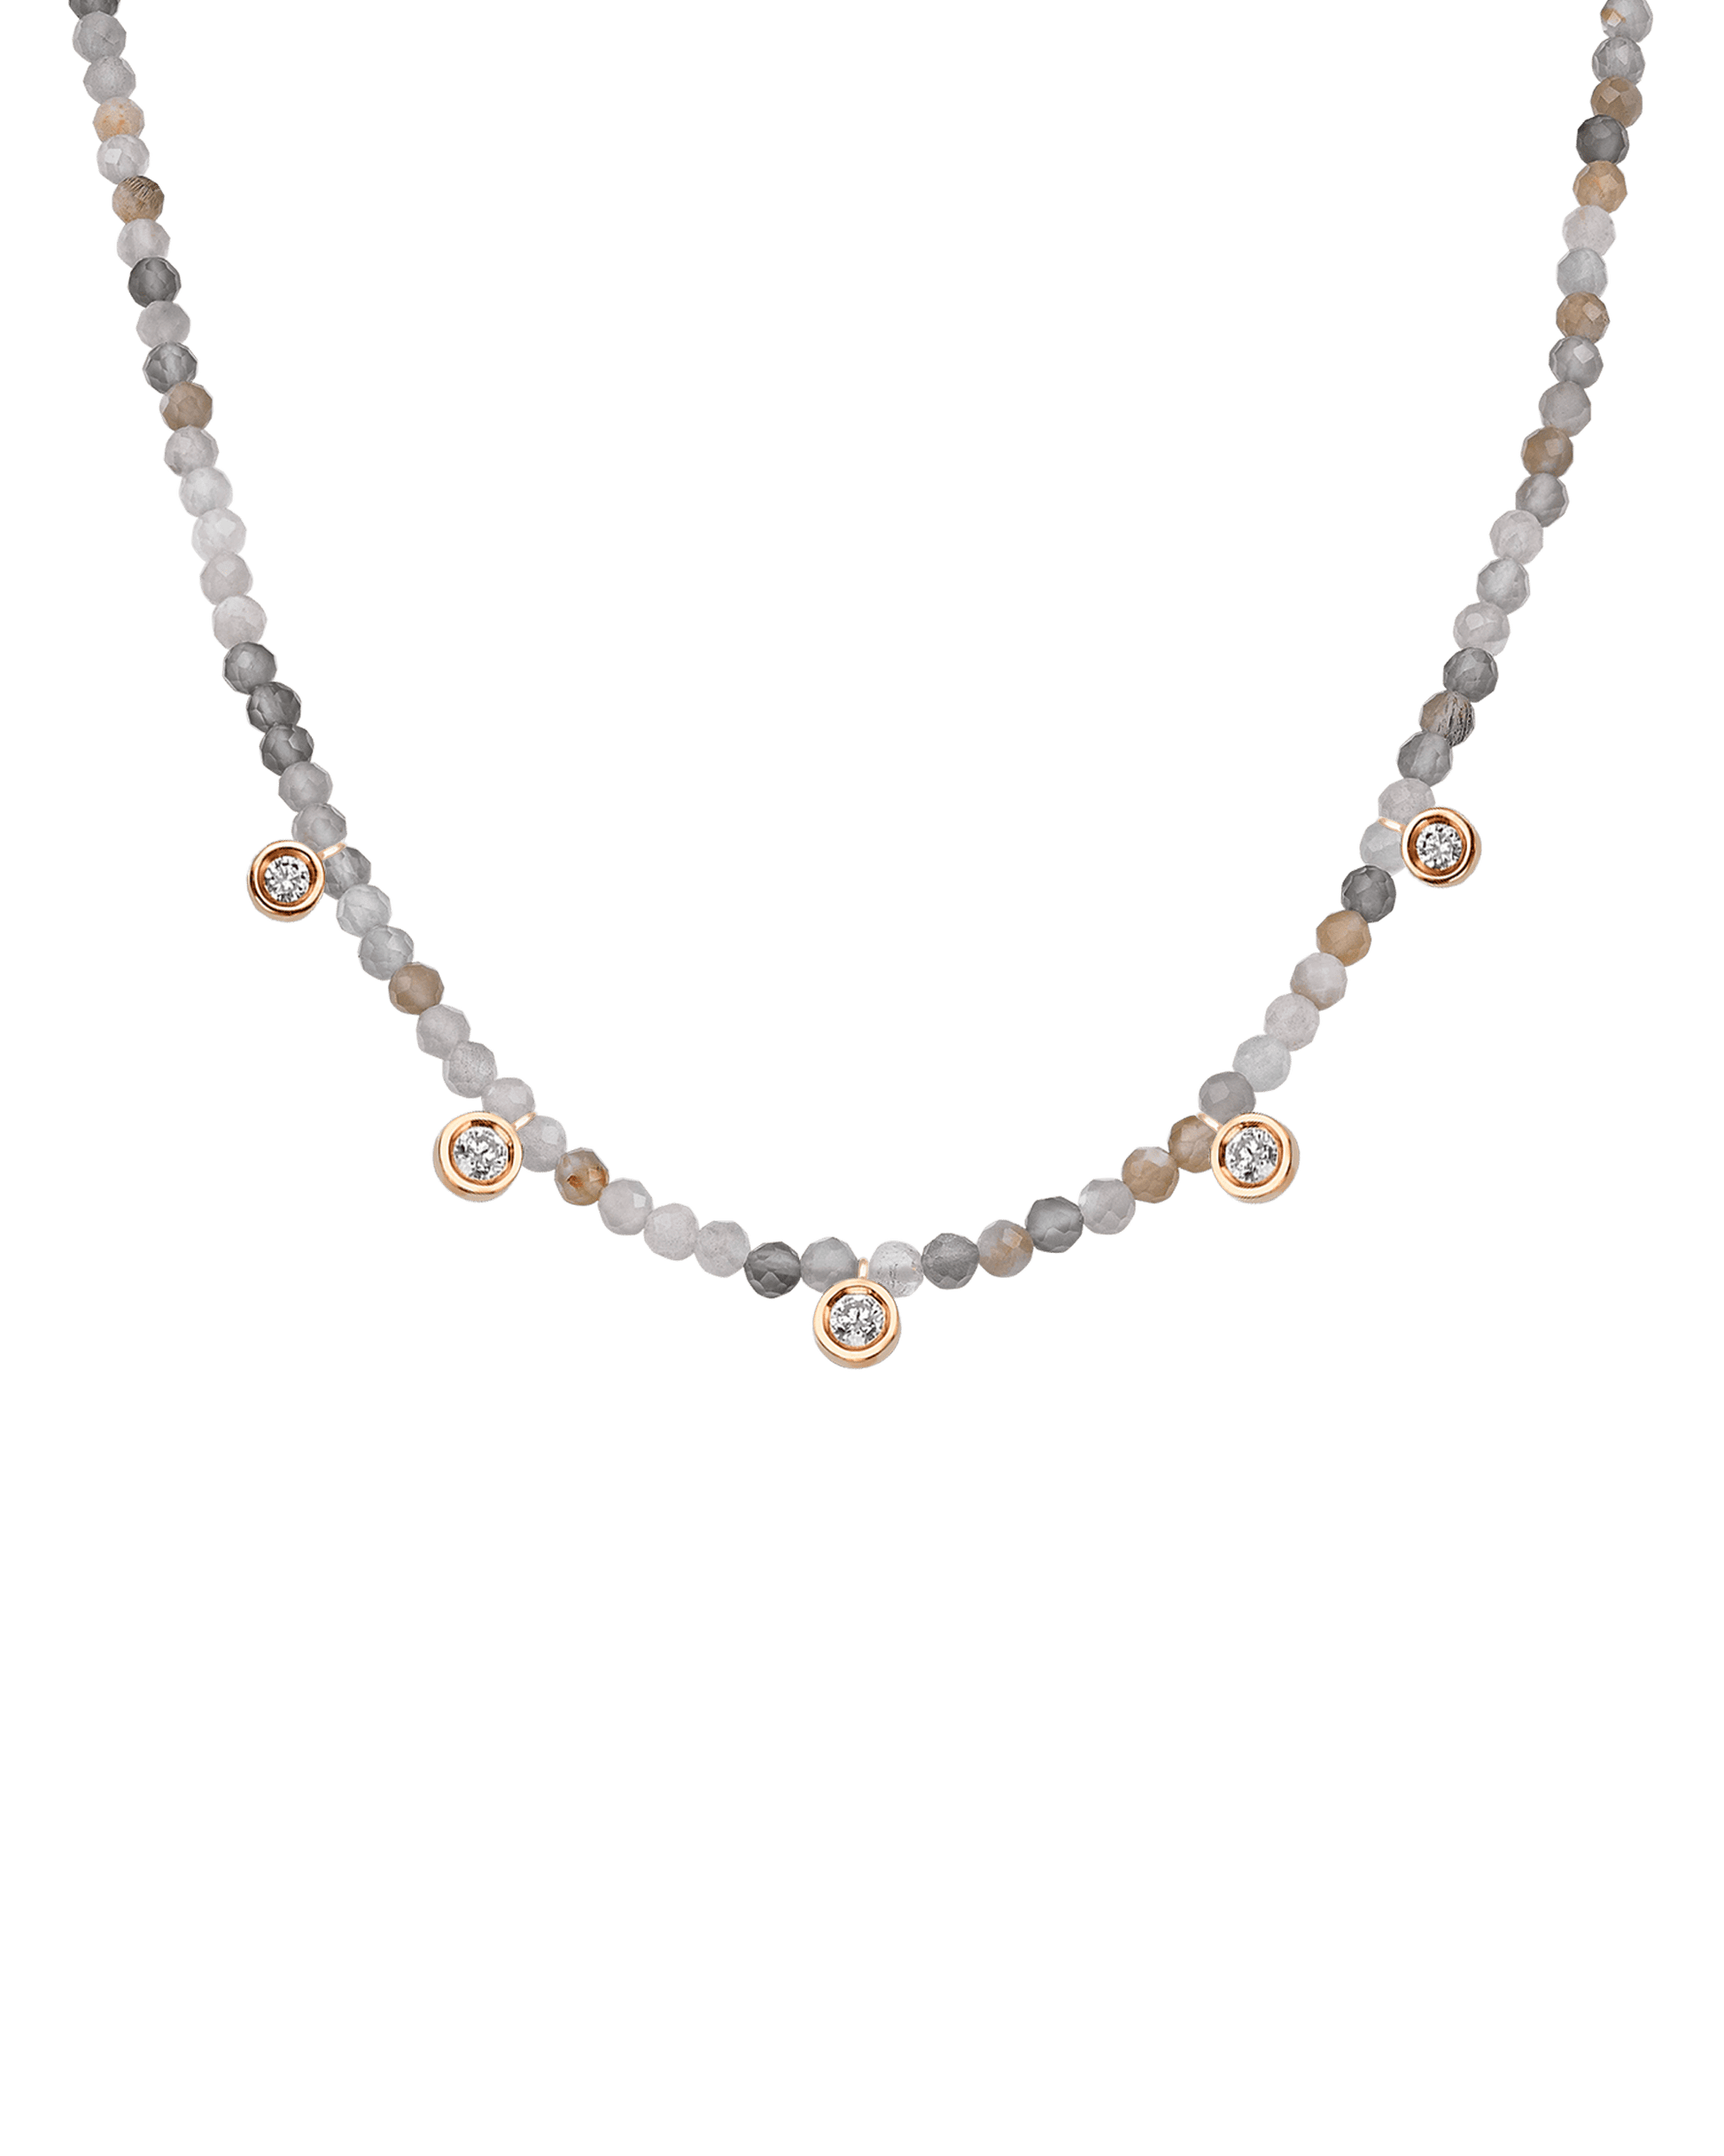 Turquoise Gemstone & Five diamonds Necklace - 14K White Gold Necklaces magal-dev 